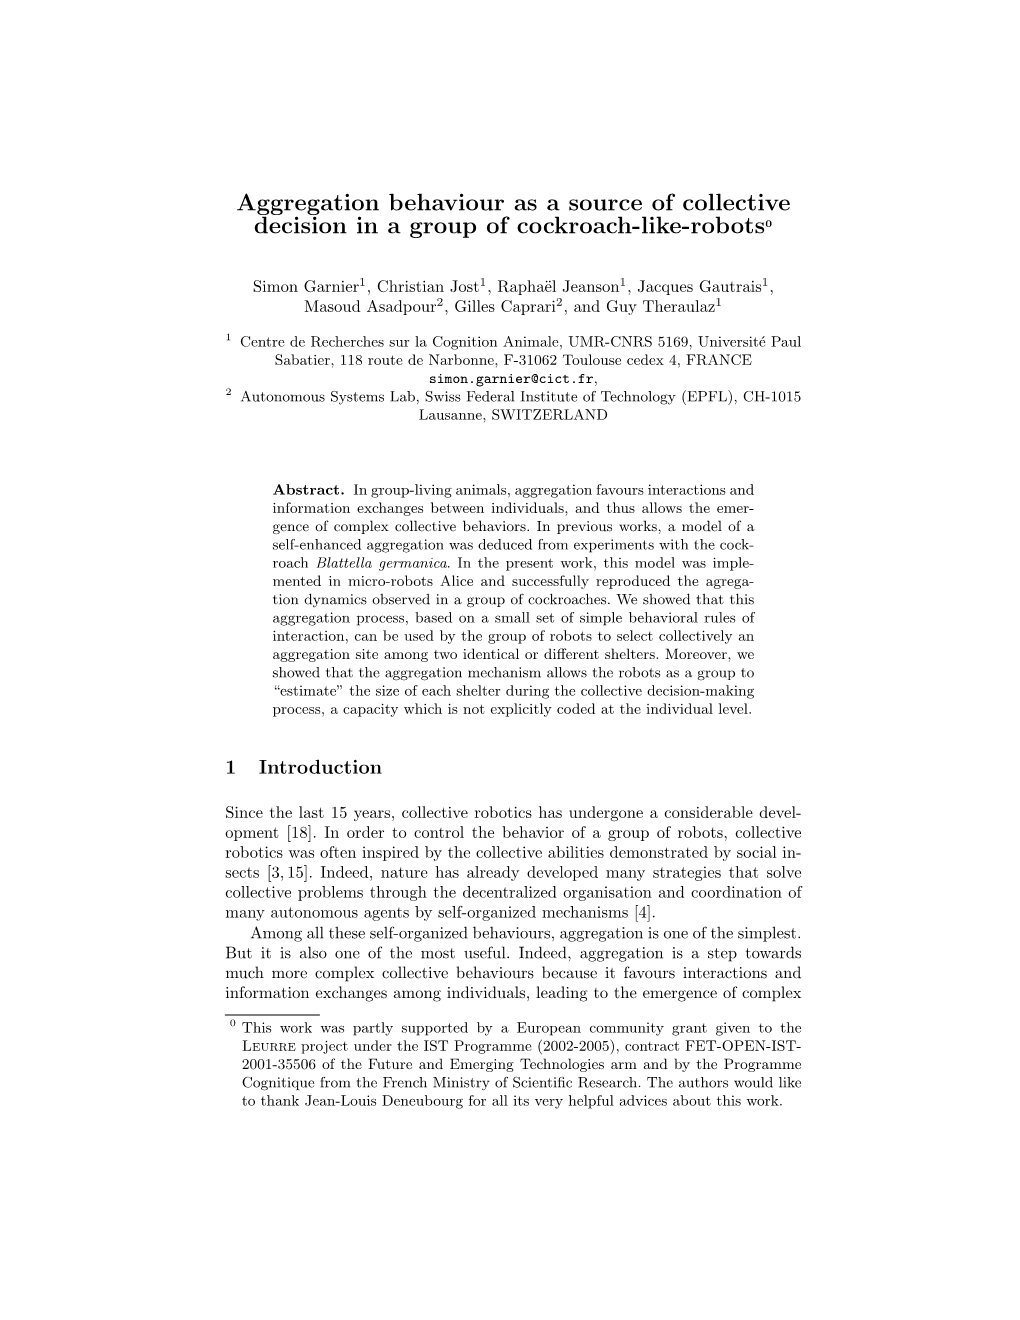 Aggregation Behaviour As a Source of Collective Decision in a Group of Cockroach-Like-Robots0